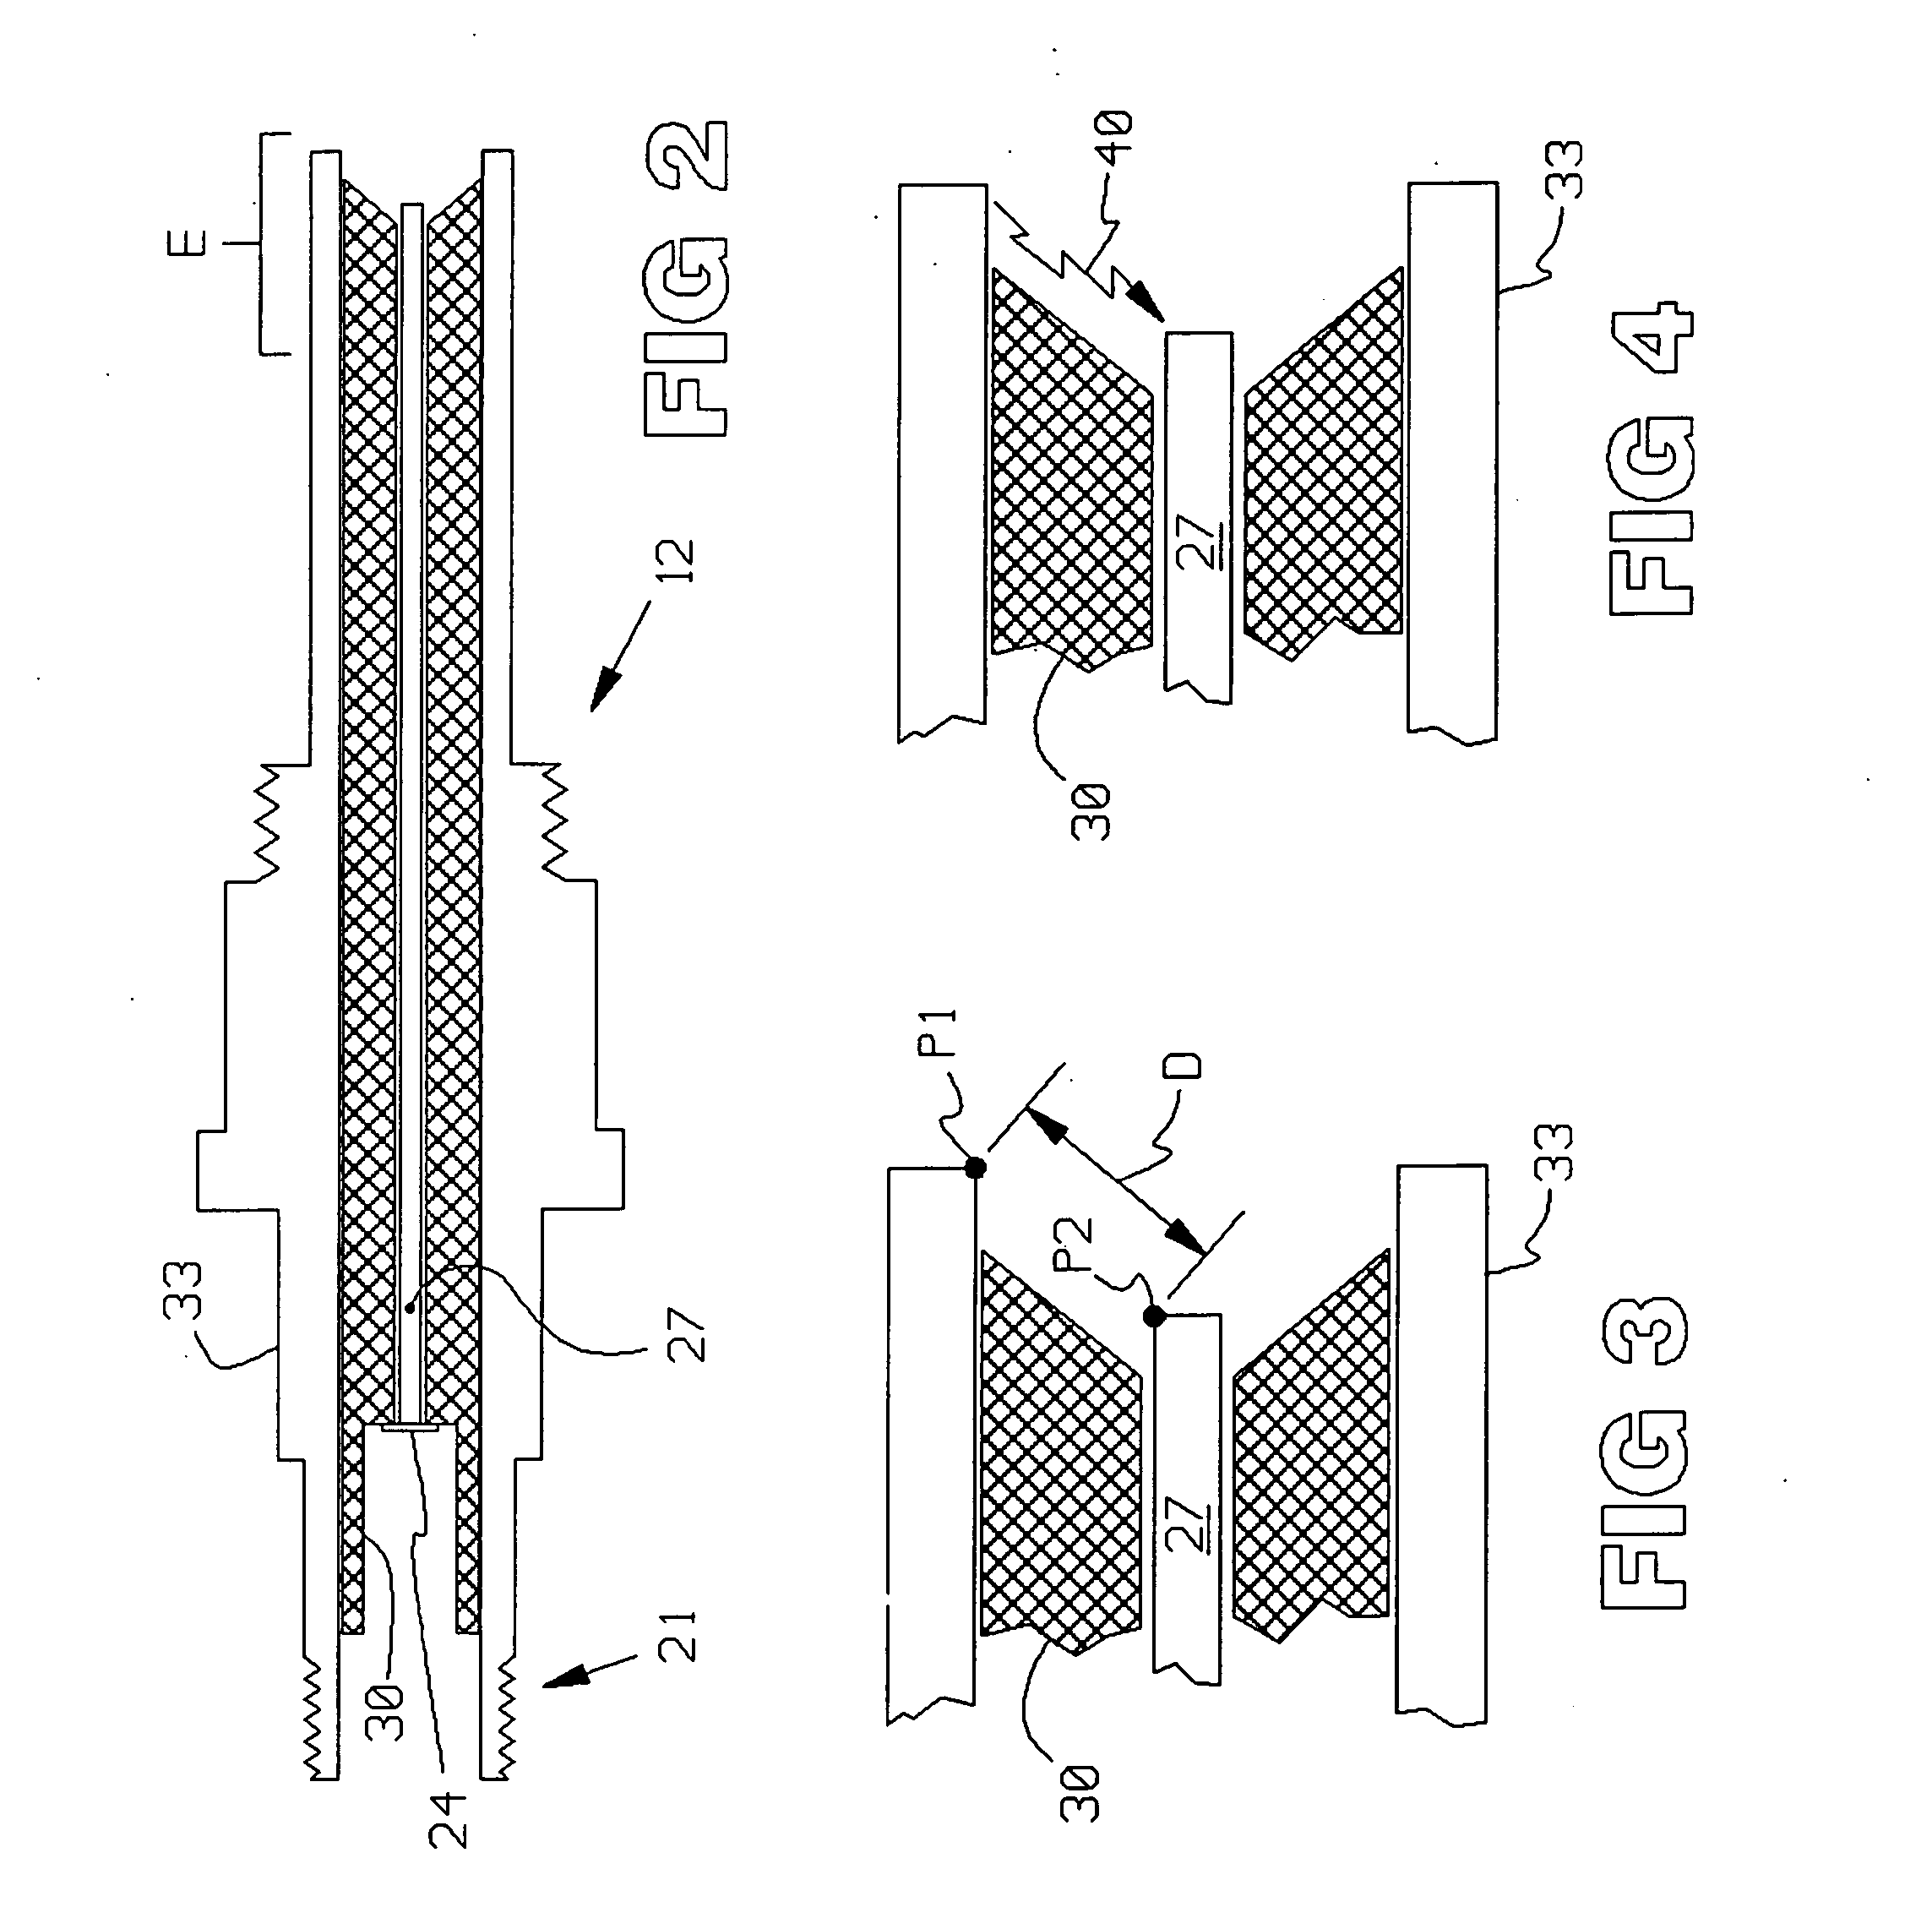 Integral spark detector in fitting which supports igniter in gas turbine engine